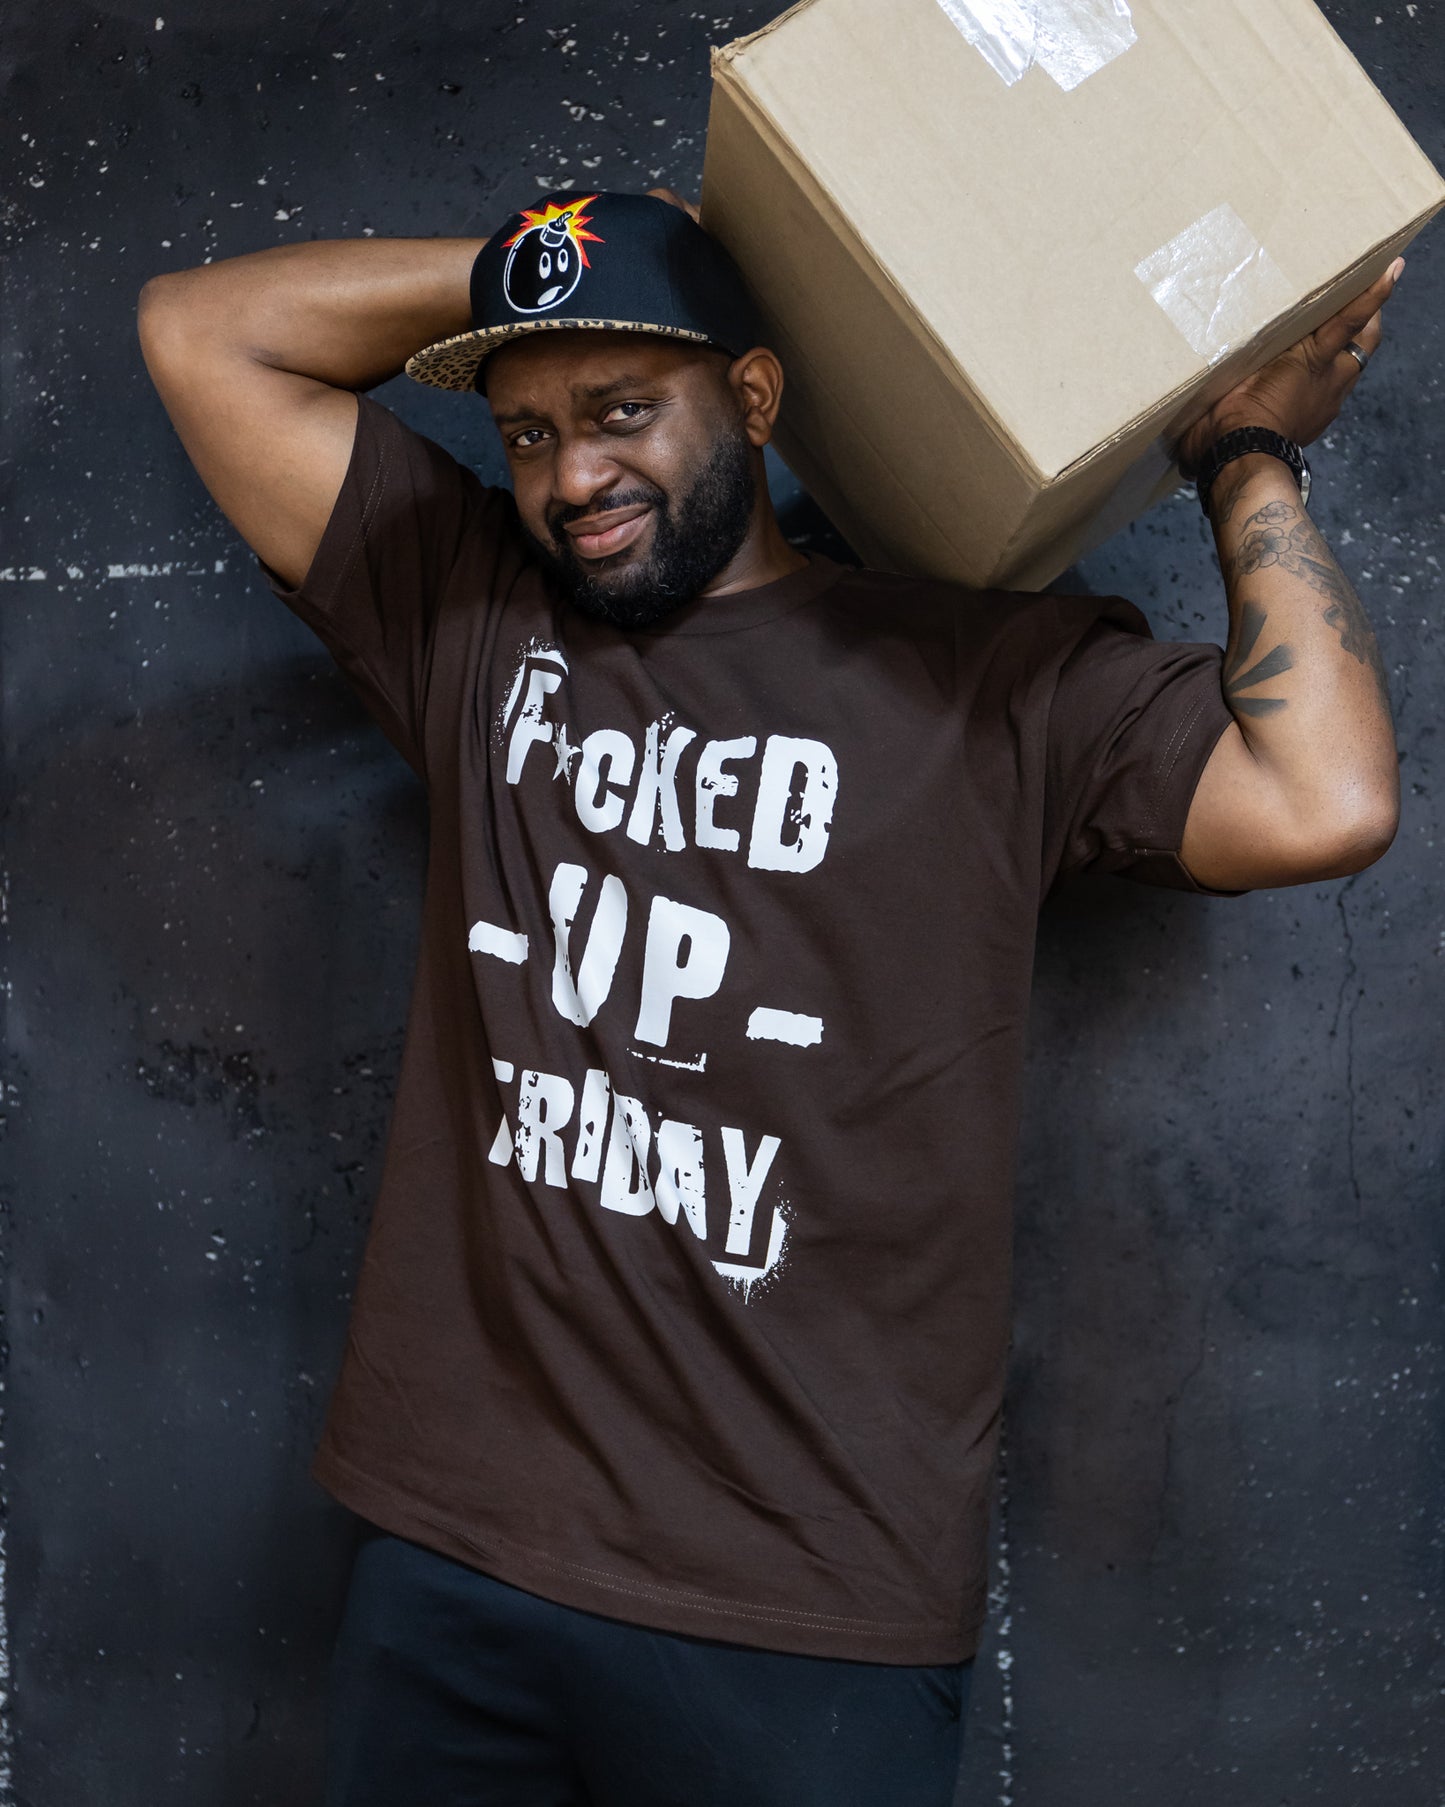 F*cked Up Friday Tee NSFW